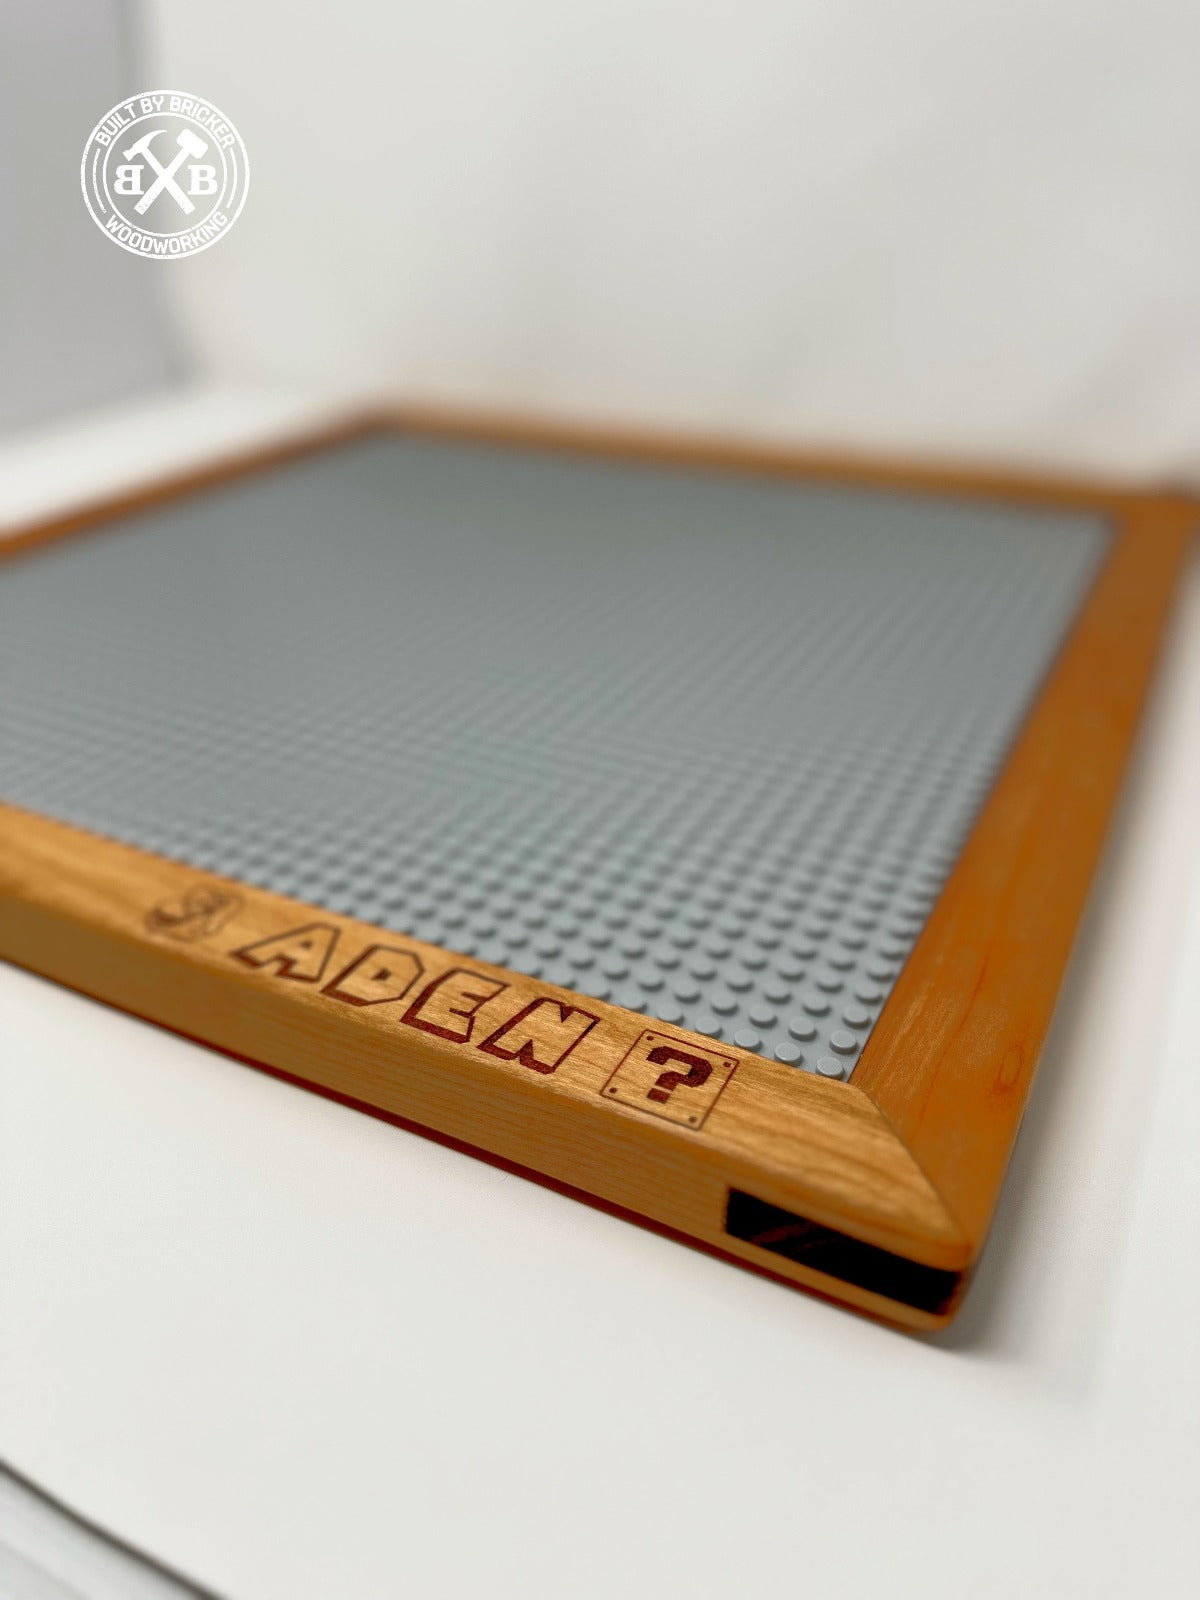 Functional Hand-crafted Wood LEGO® Trays